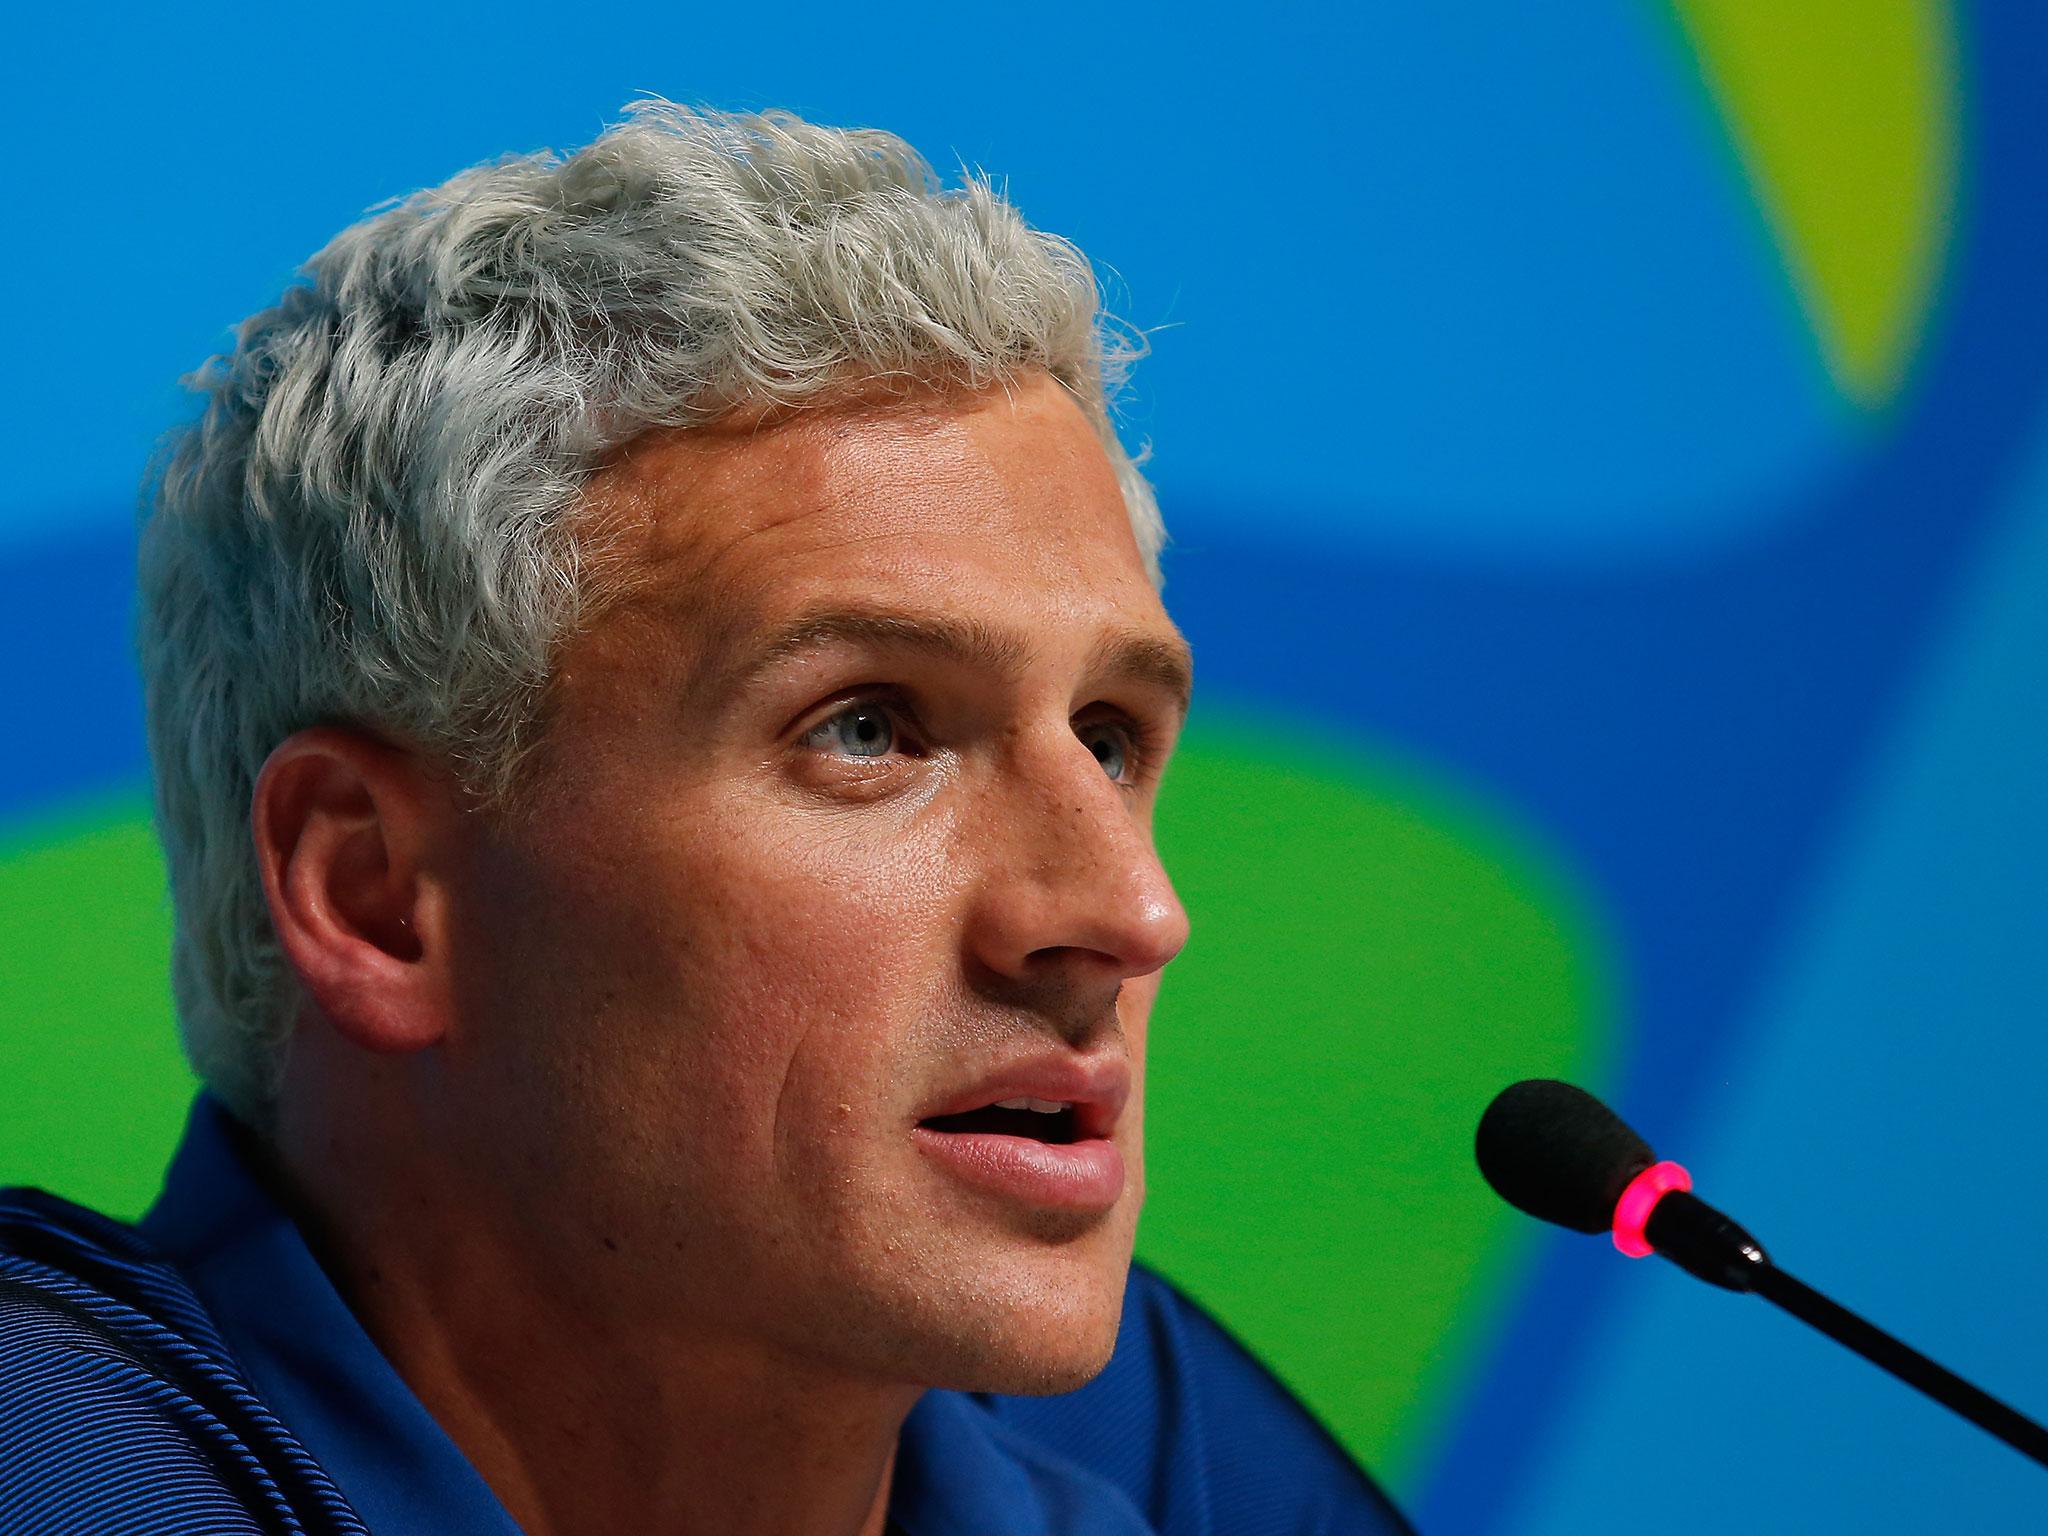 Ryan Lochte dropped by Speedo after Rio 2016 &apos;robbery&apos; incident